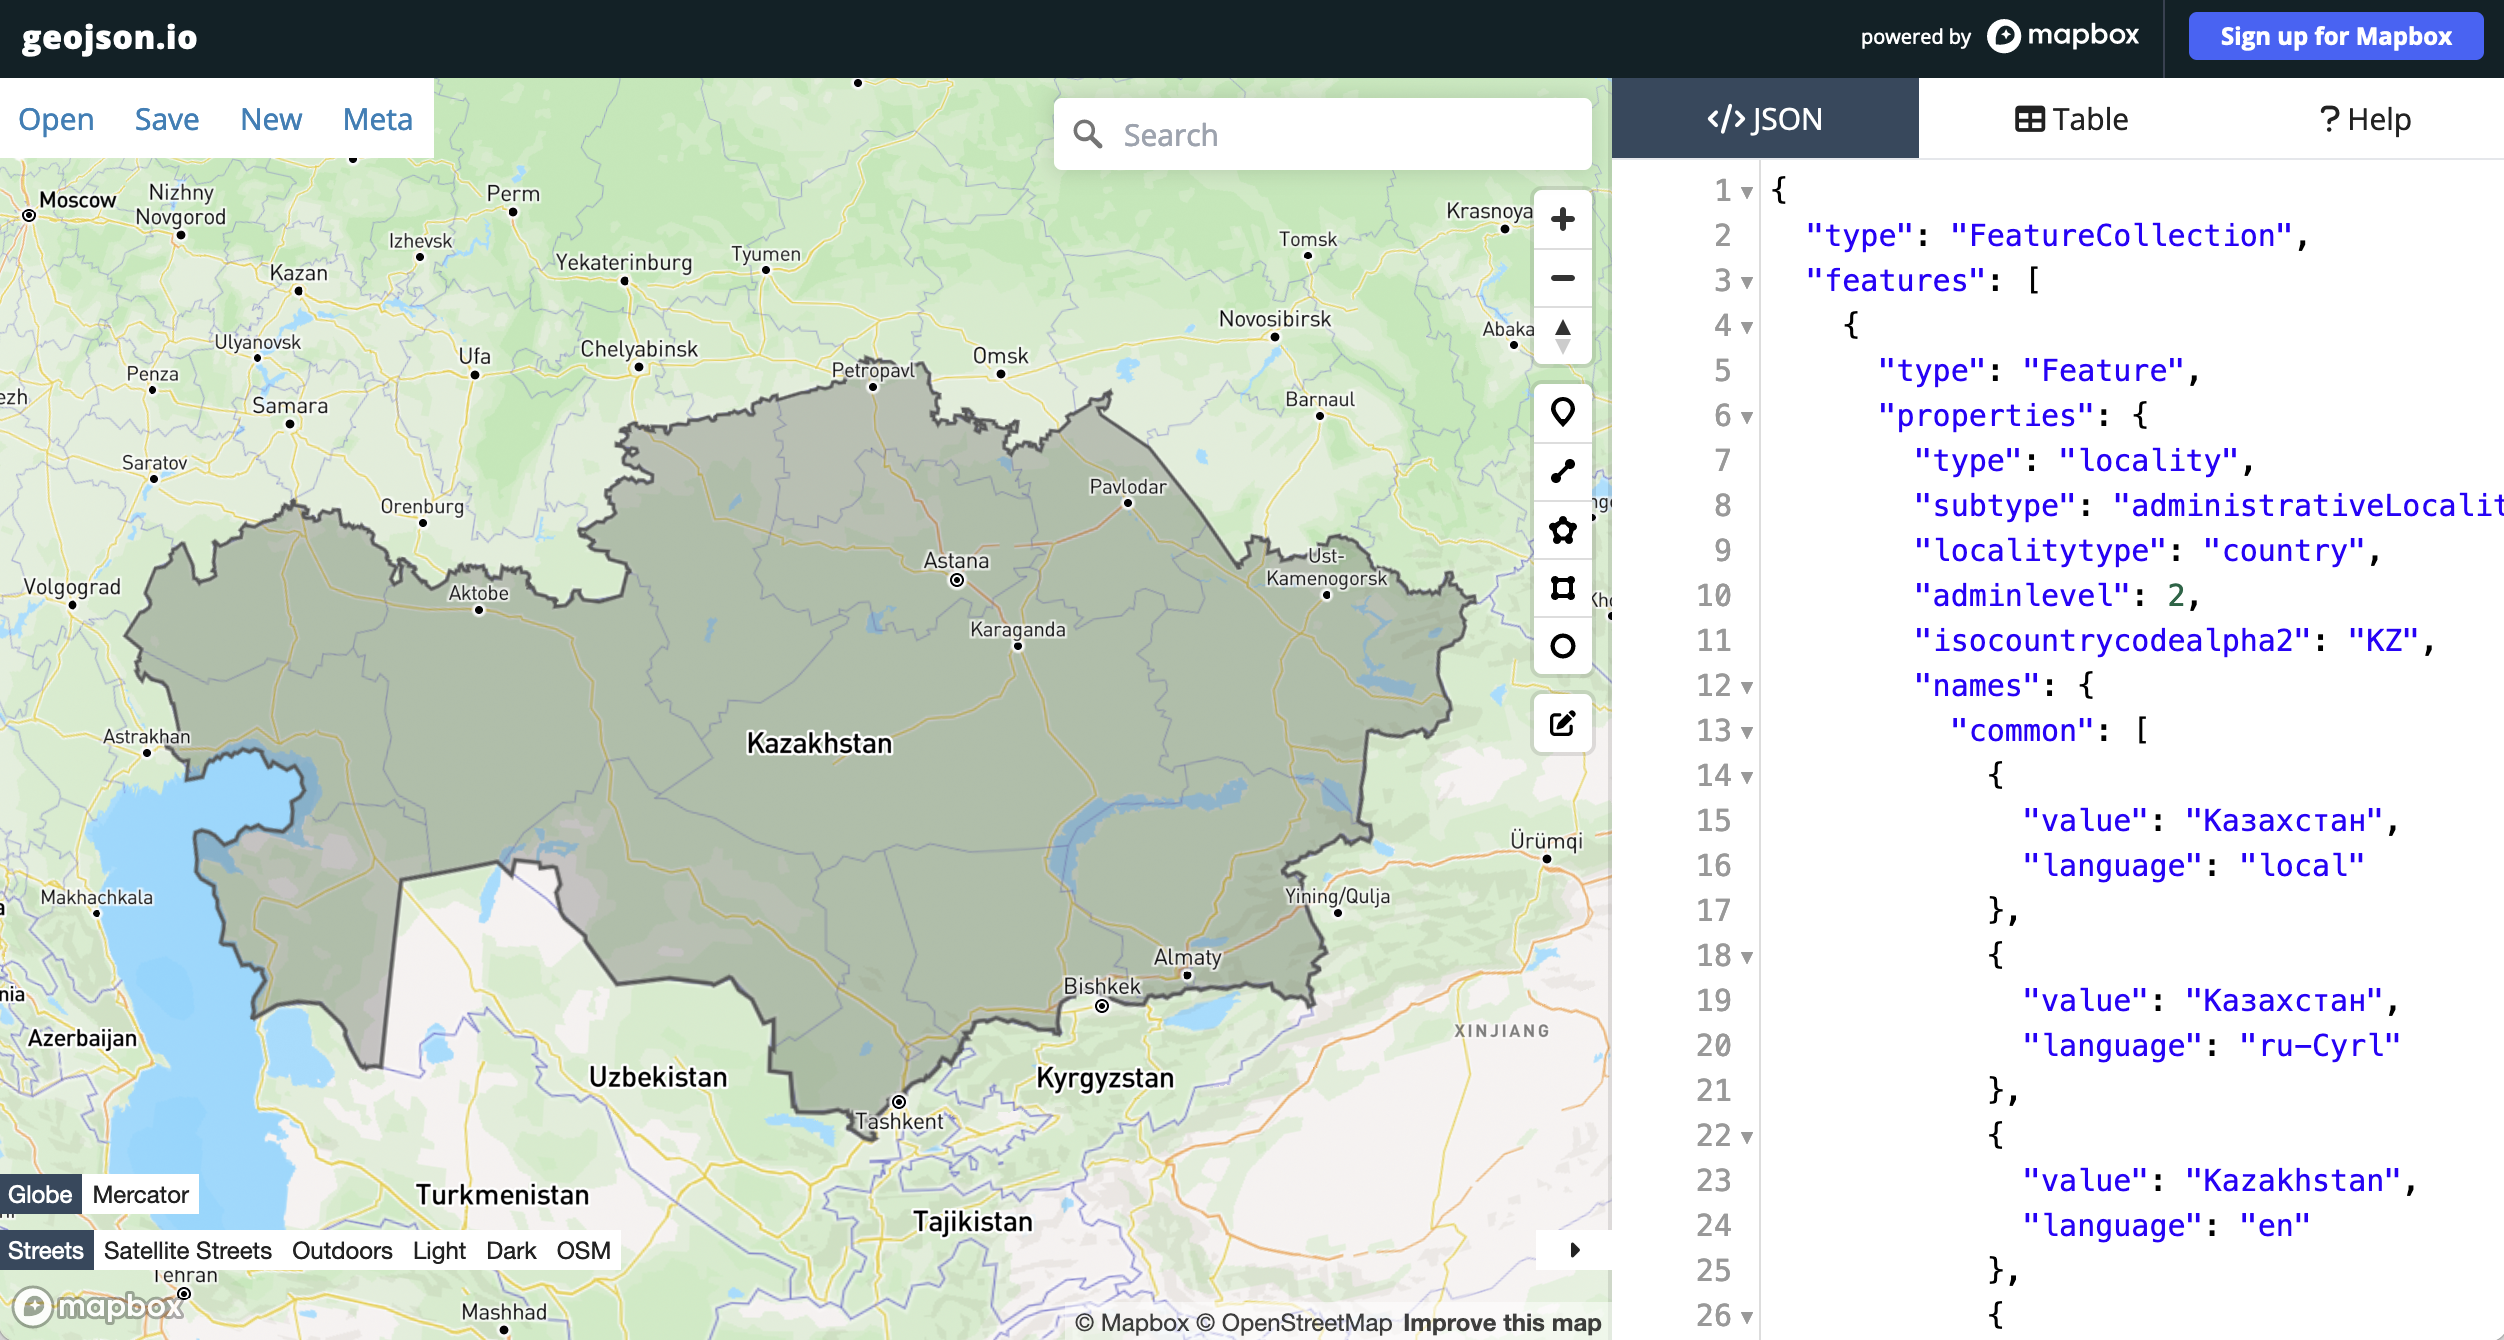 Kazakhstan displayed with a detailed border outline on geojson.io